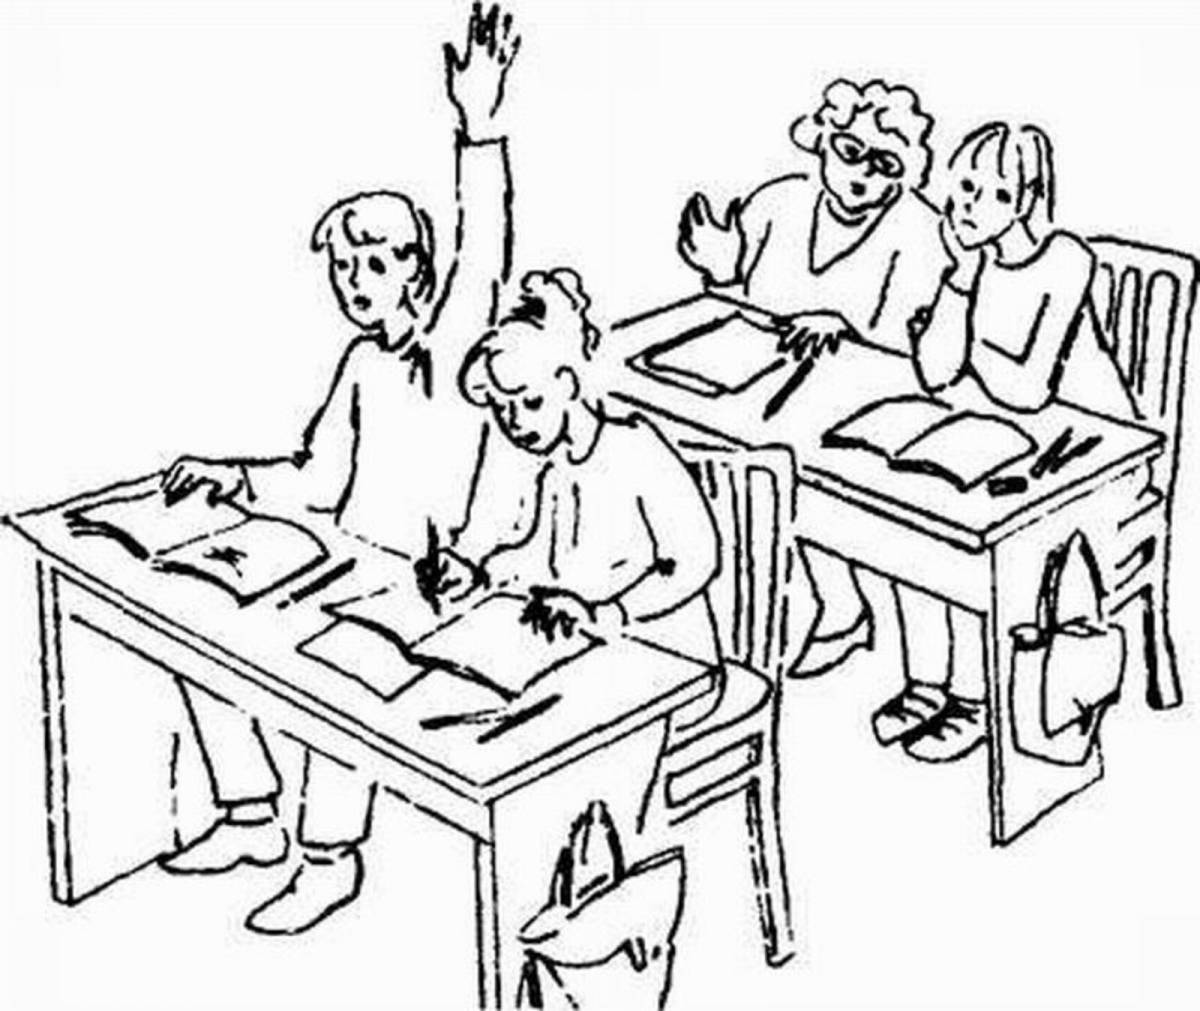 Colorful school life coloring page